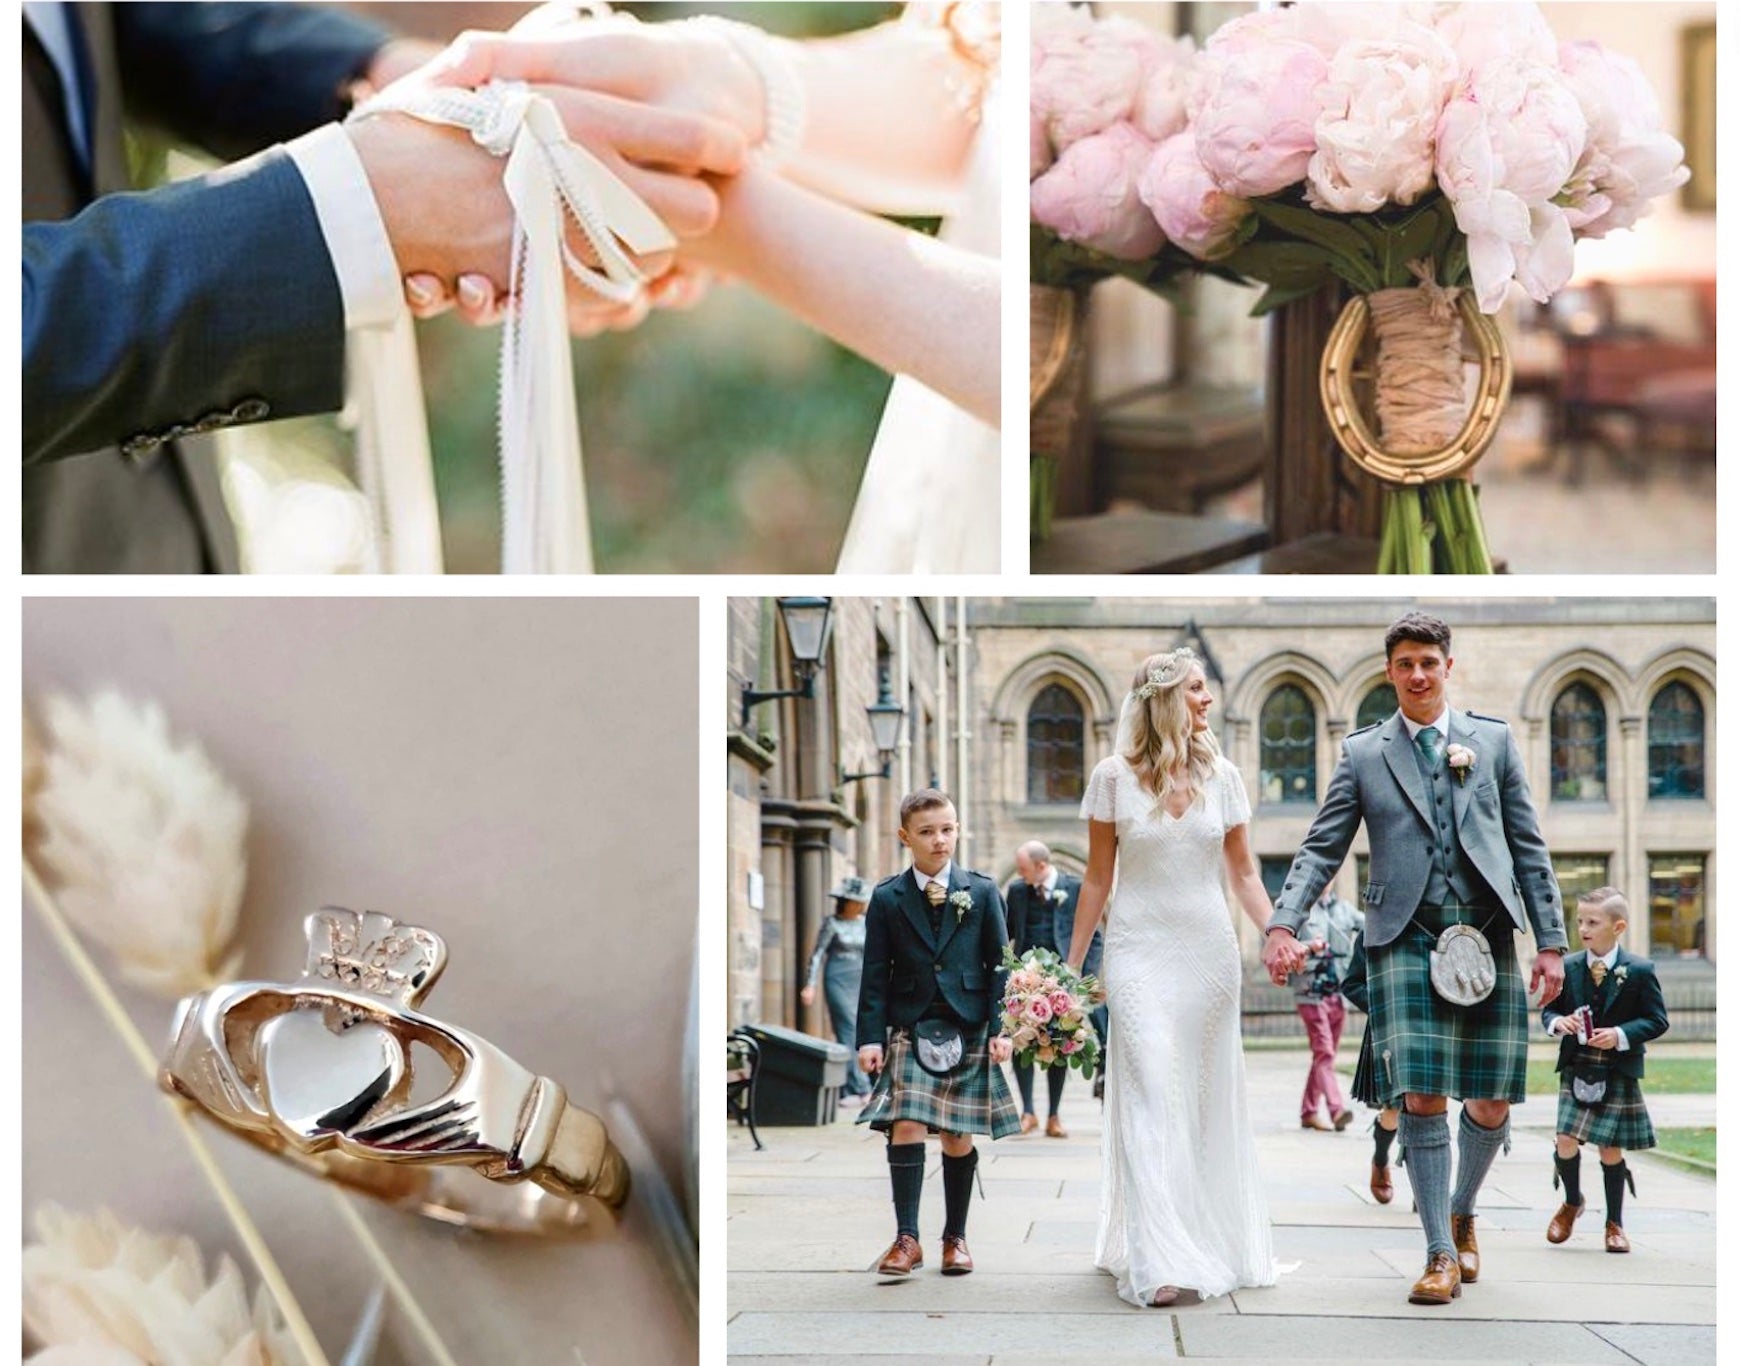 The Irish Wedding Traditions You Need To Know